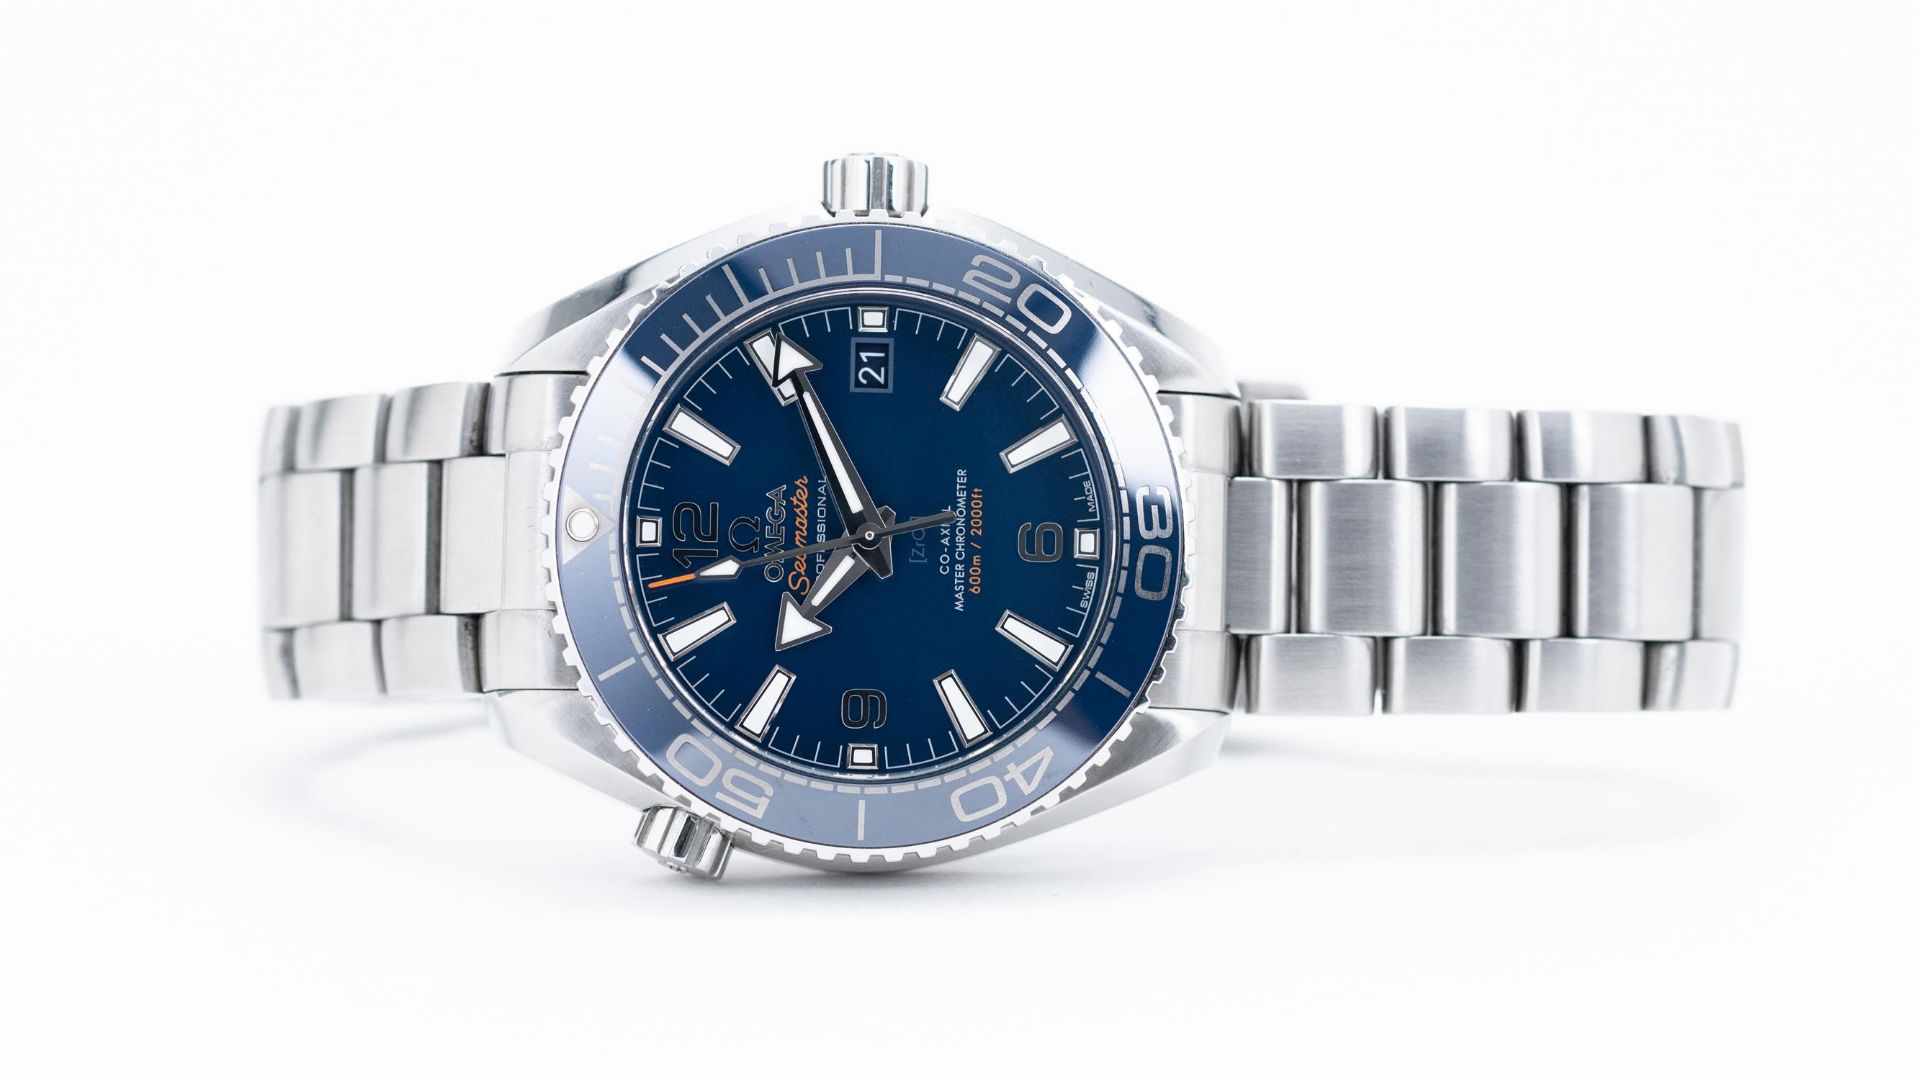 2019 Omega Planet Ocean Ceramic with Box and Paperwork - Image 5 of 5